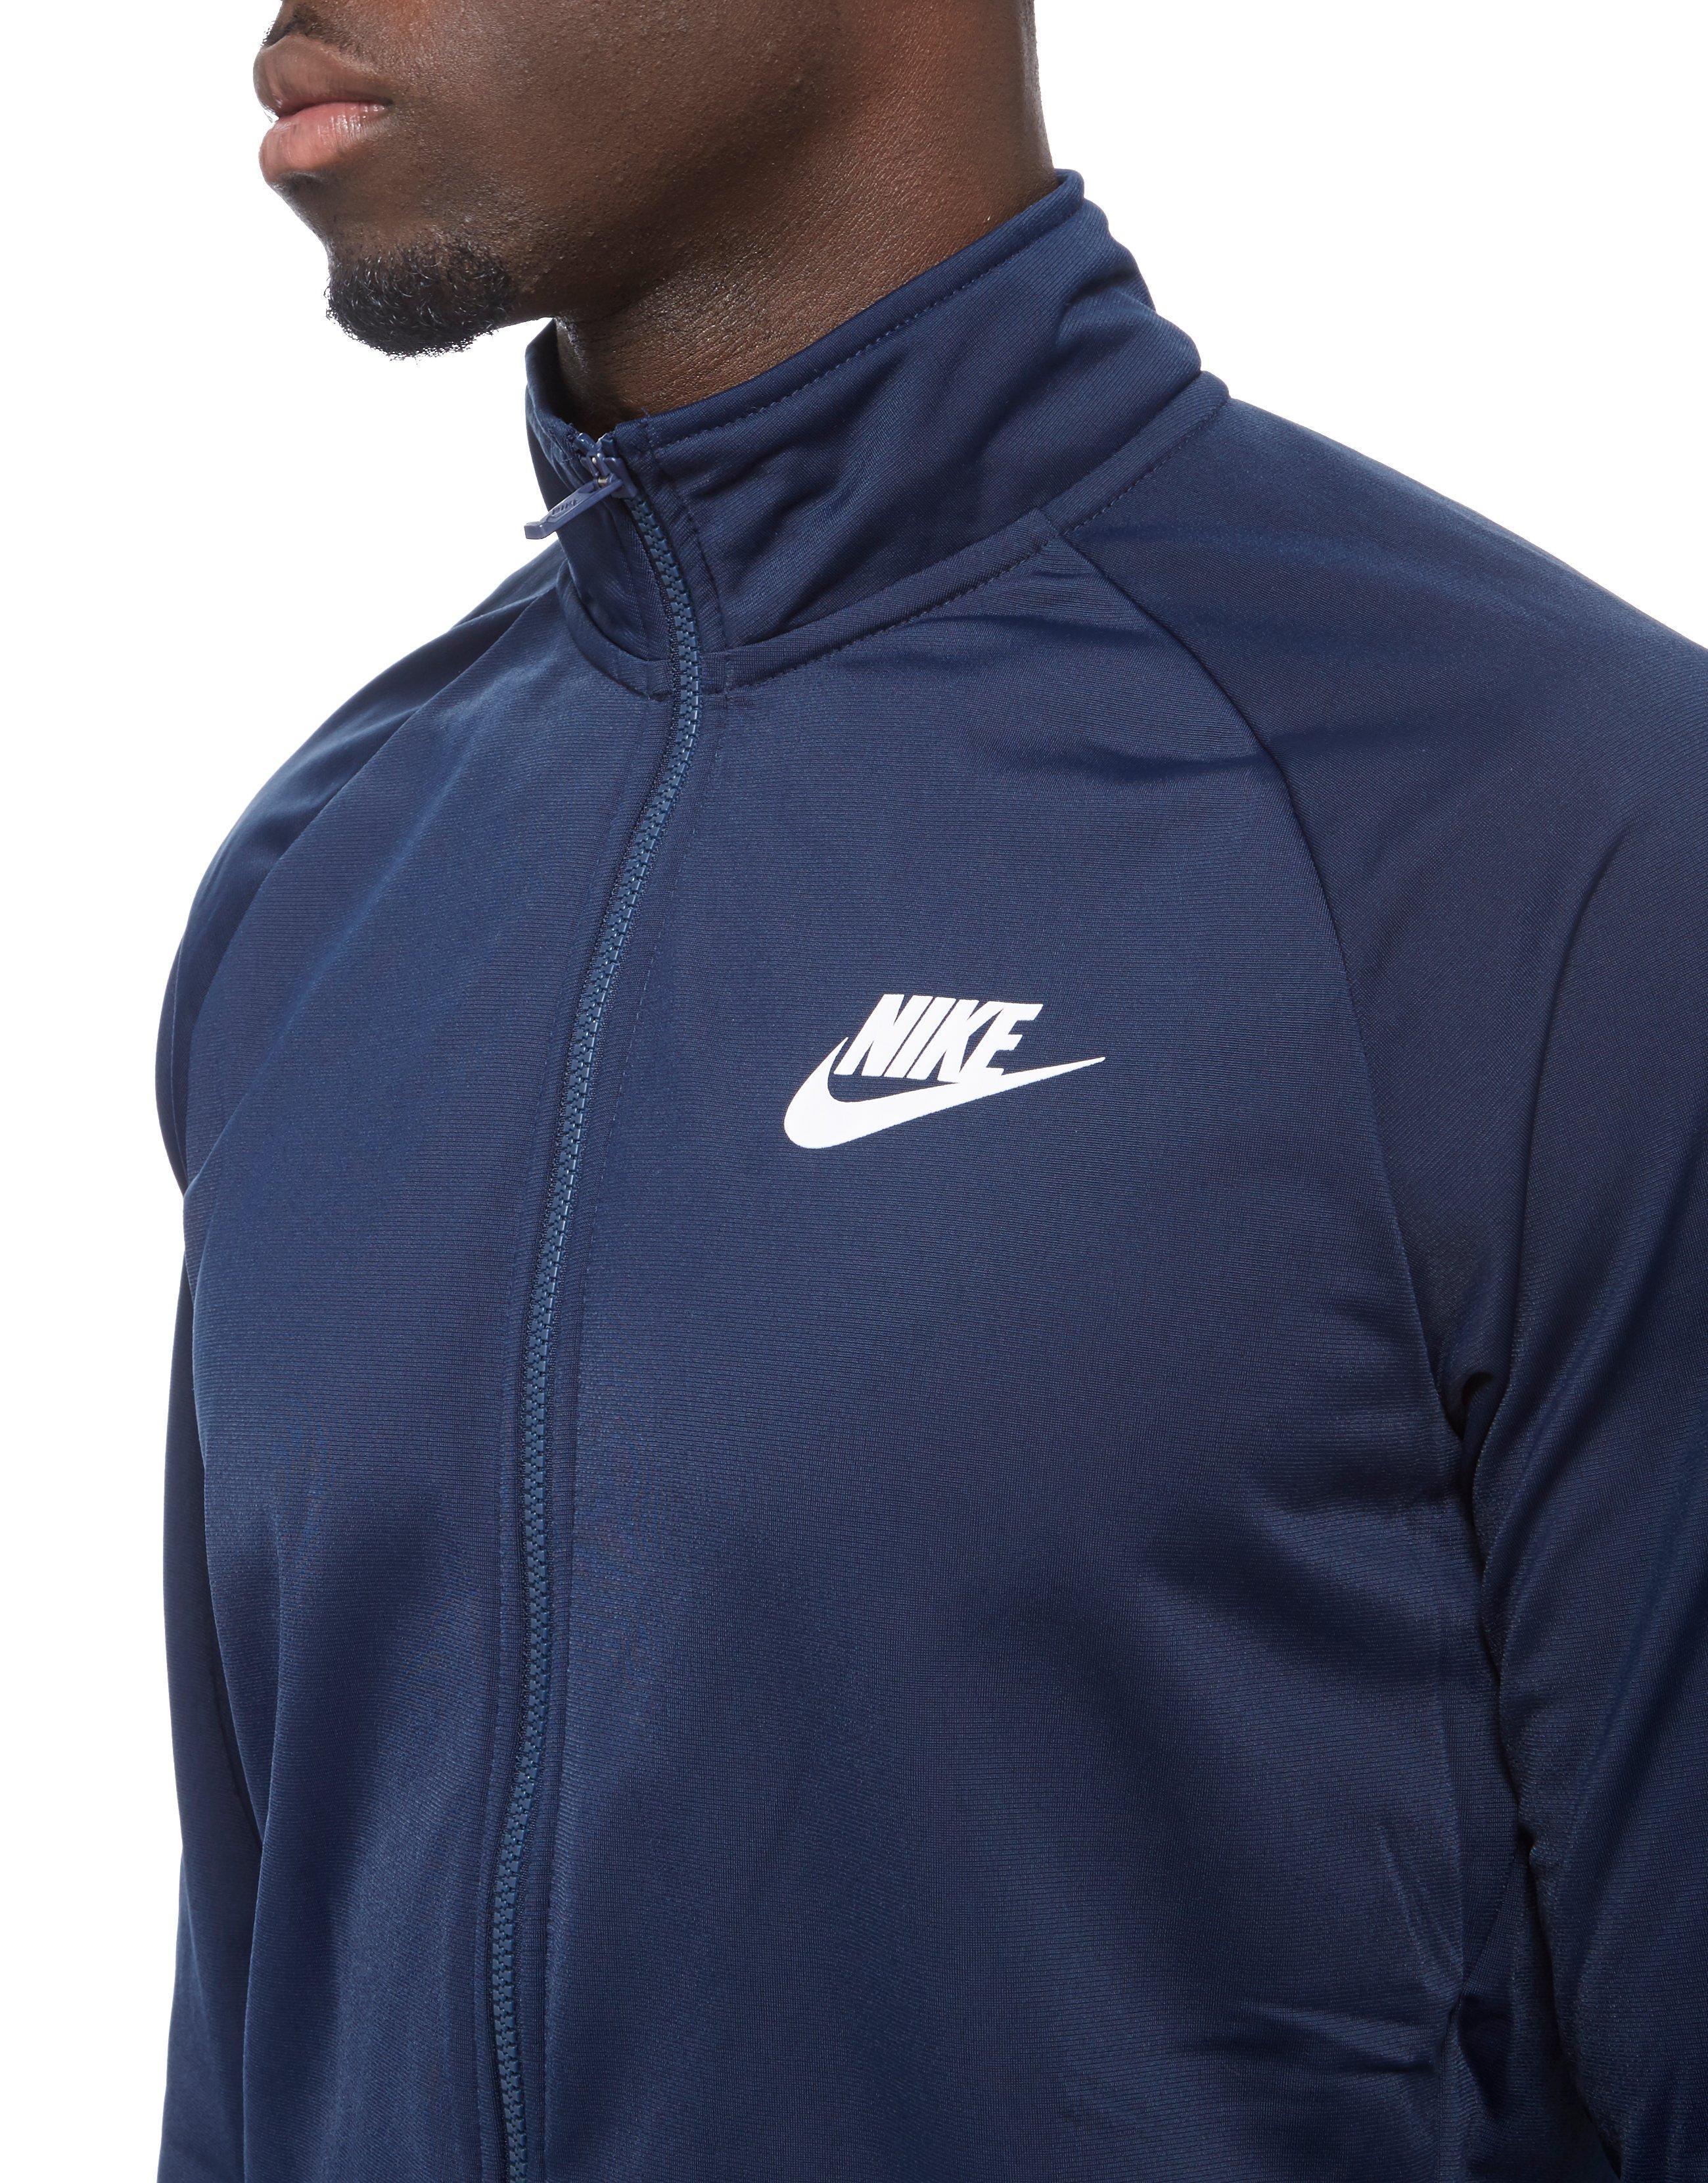 Nike Synthetic Season 2 Poly Tracksuit in Navy (Blue) for Men - Lyst